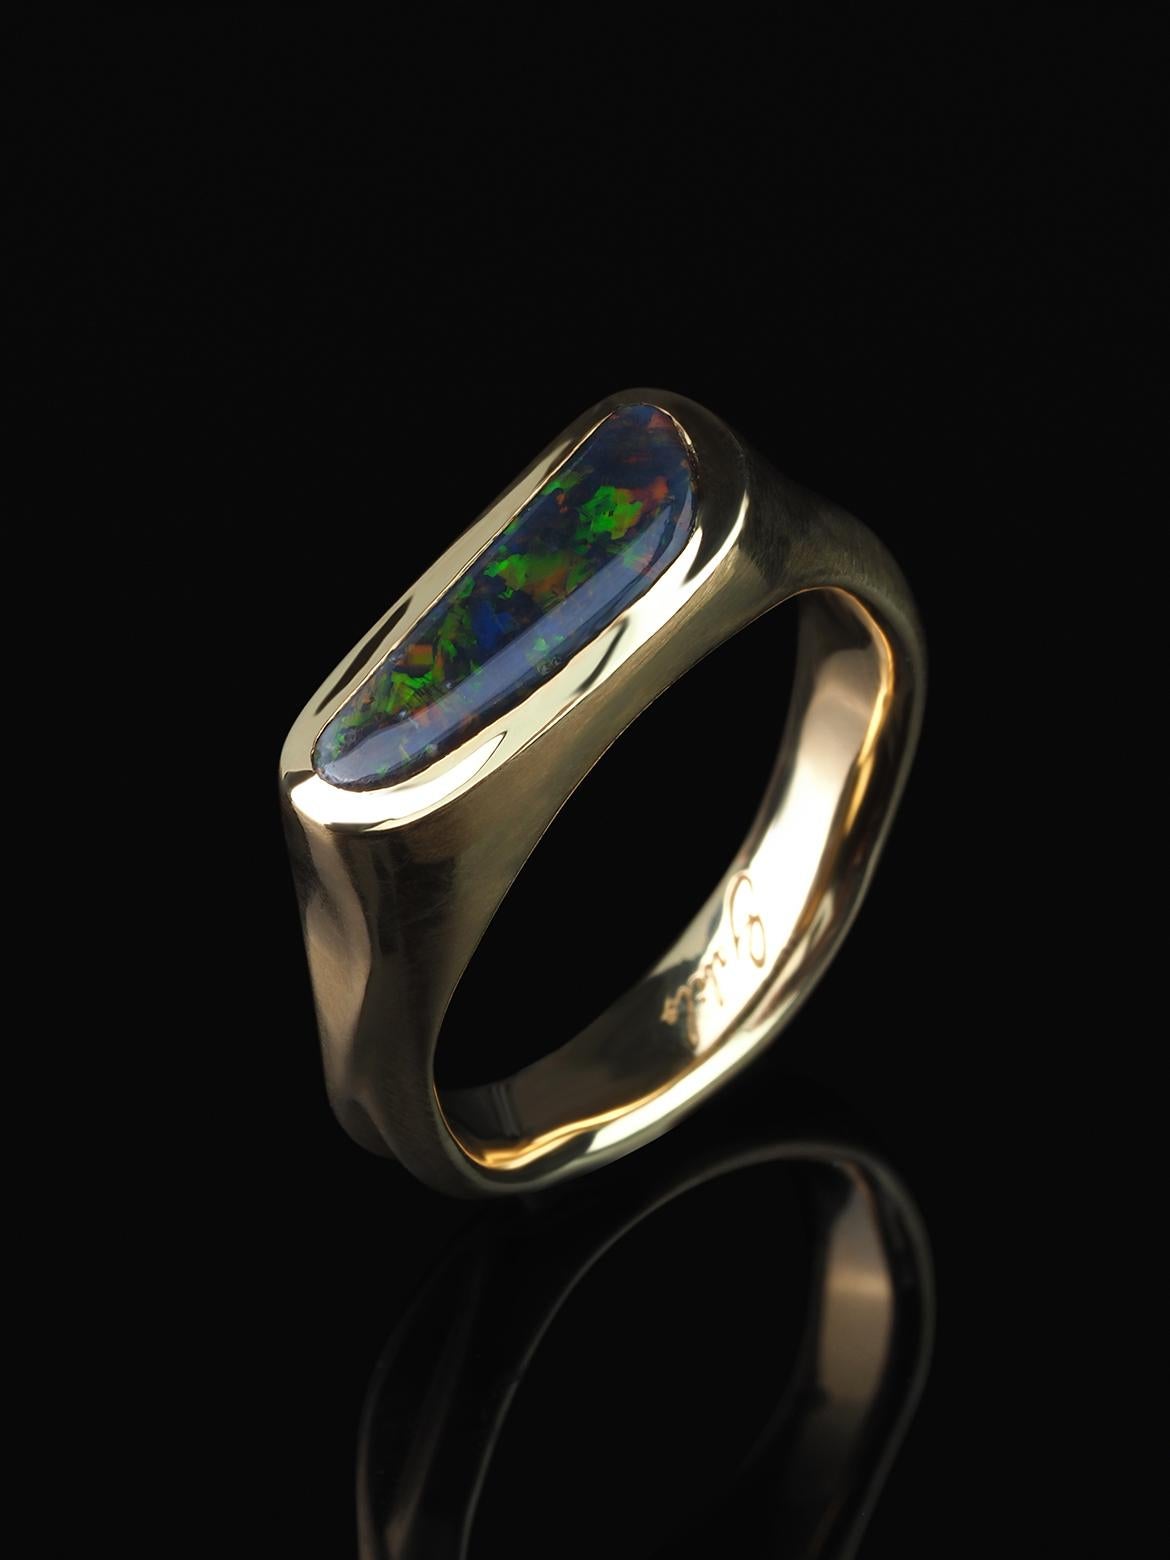 18K yellow gold ring with natural Black Opal
black opal - Australia
opal measurements - 0.2 х 0.59 in / 5 х 15 mm
stone weight - 1.40 carats
ring weight - 11.74 grams
ring size - 8.5 US


We ship our jewelry worldwide – for our customers it is free